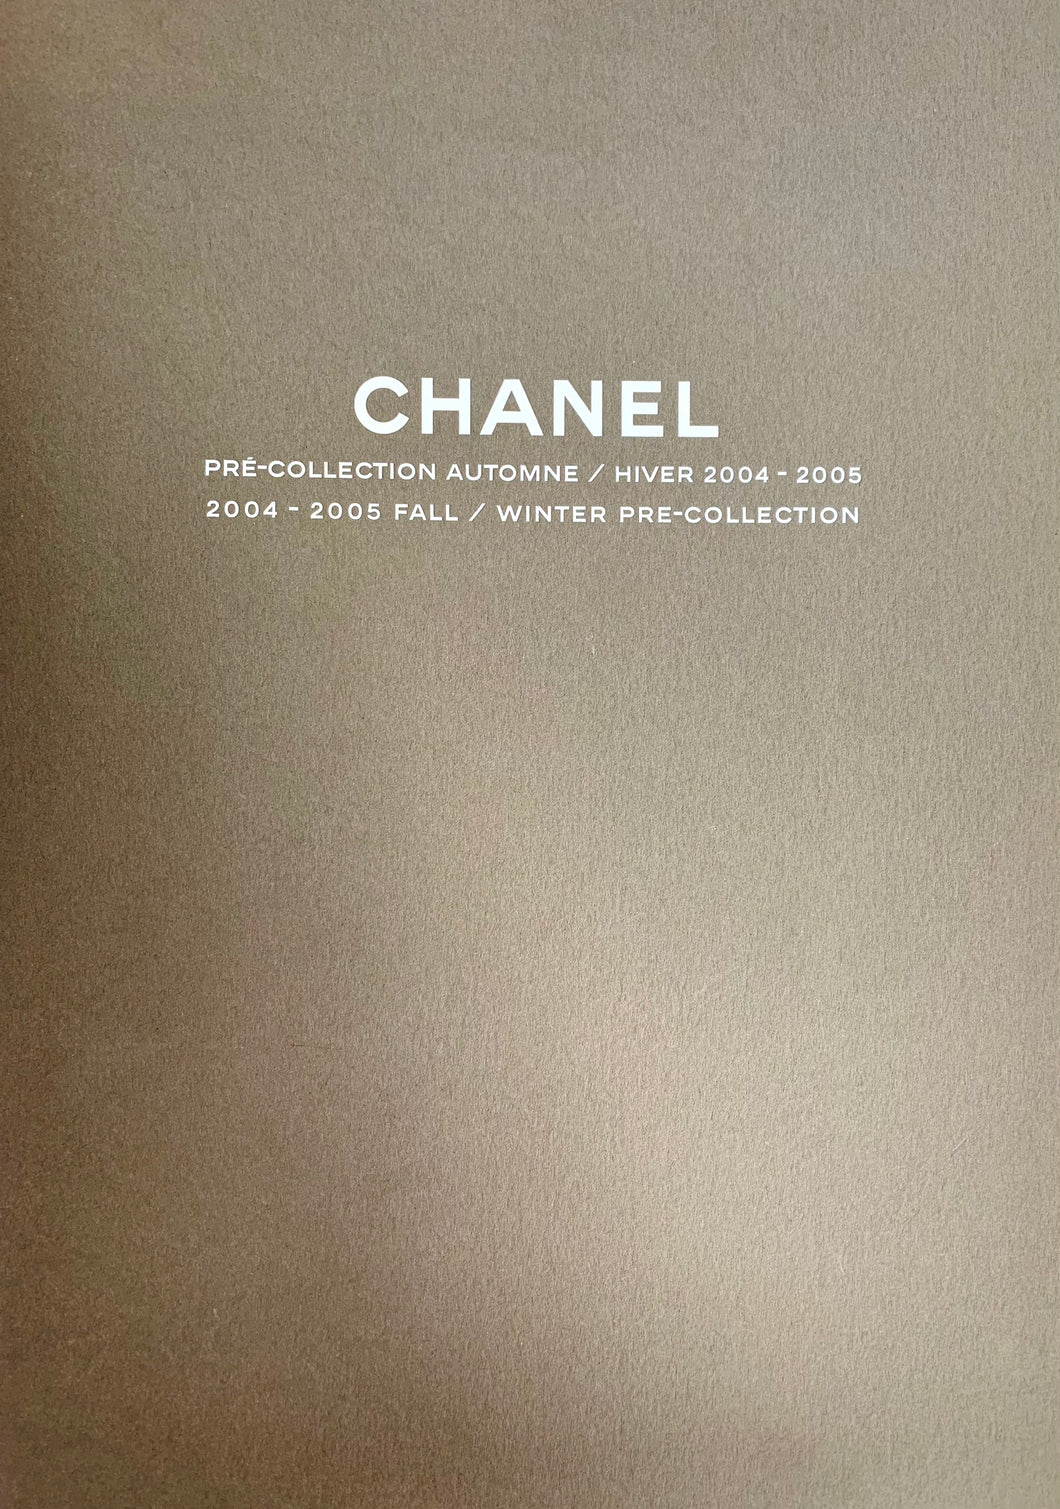 CHANEL 2004 AUTUMN WINTER PRE-COLLECTION CATALOGUE WITH PRICE LIST